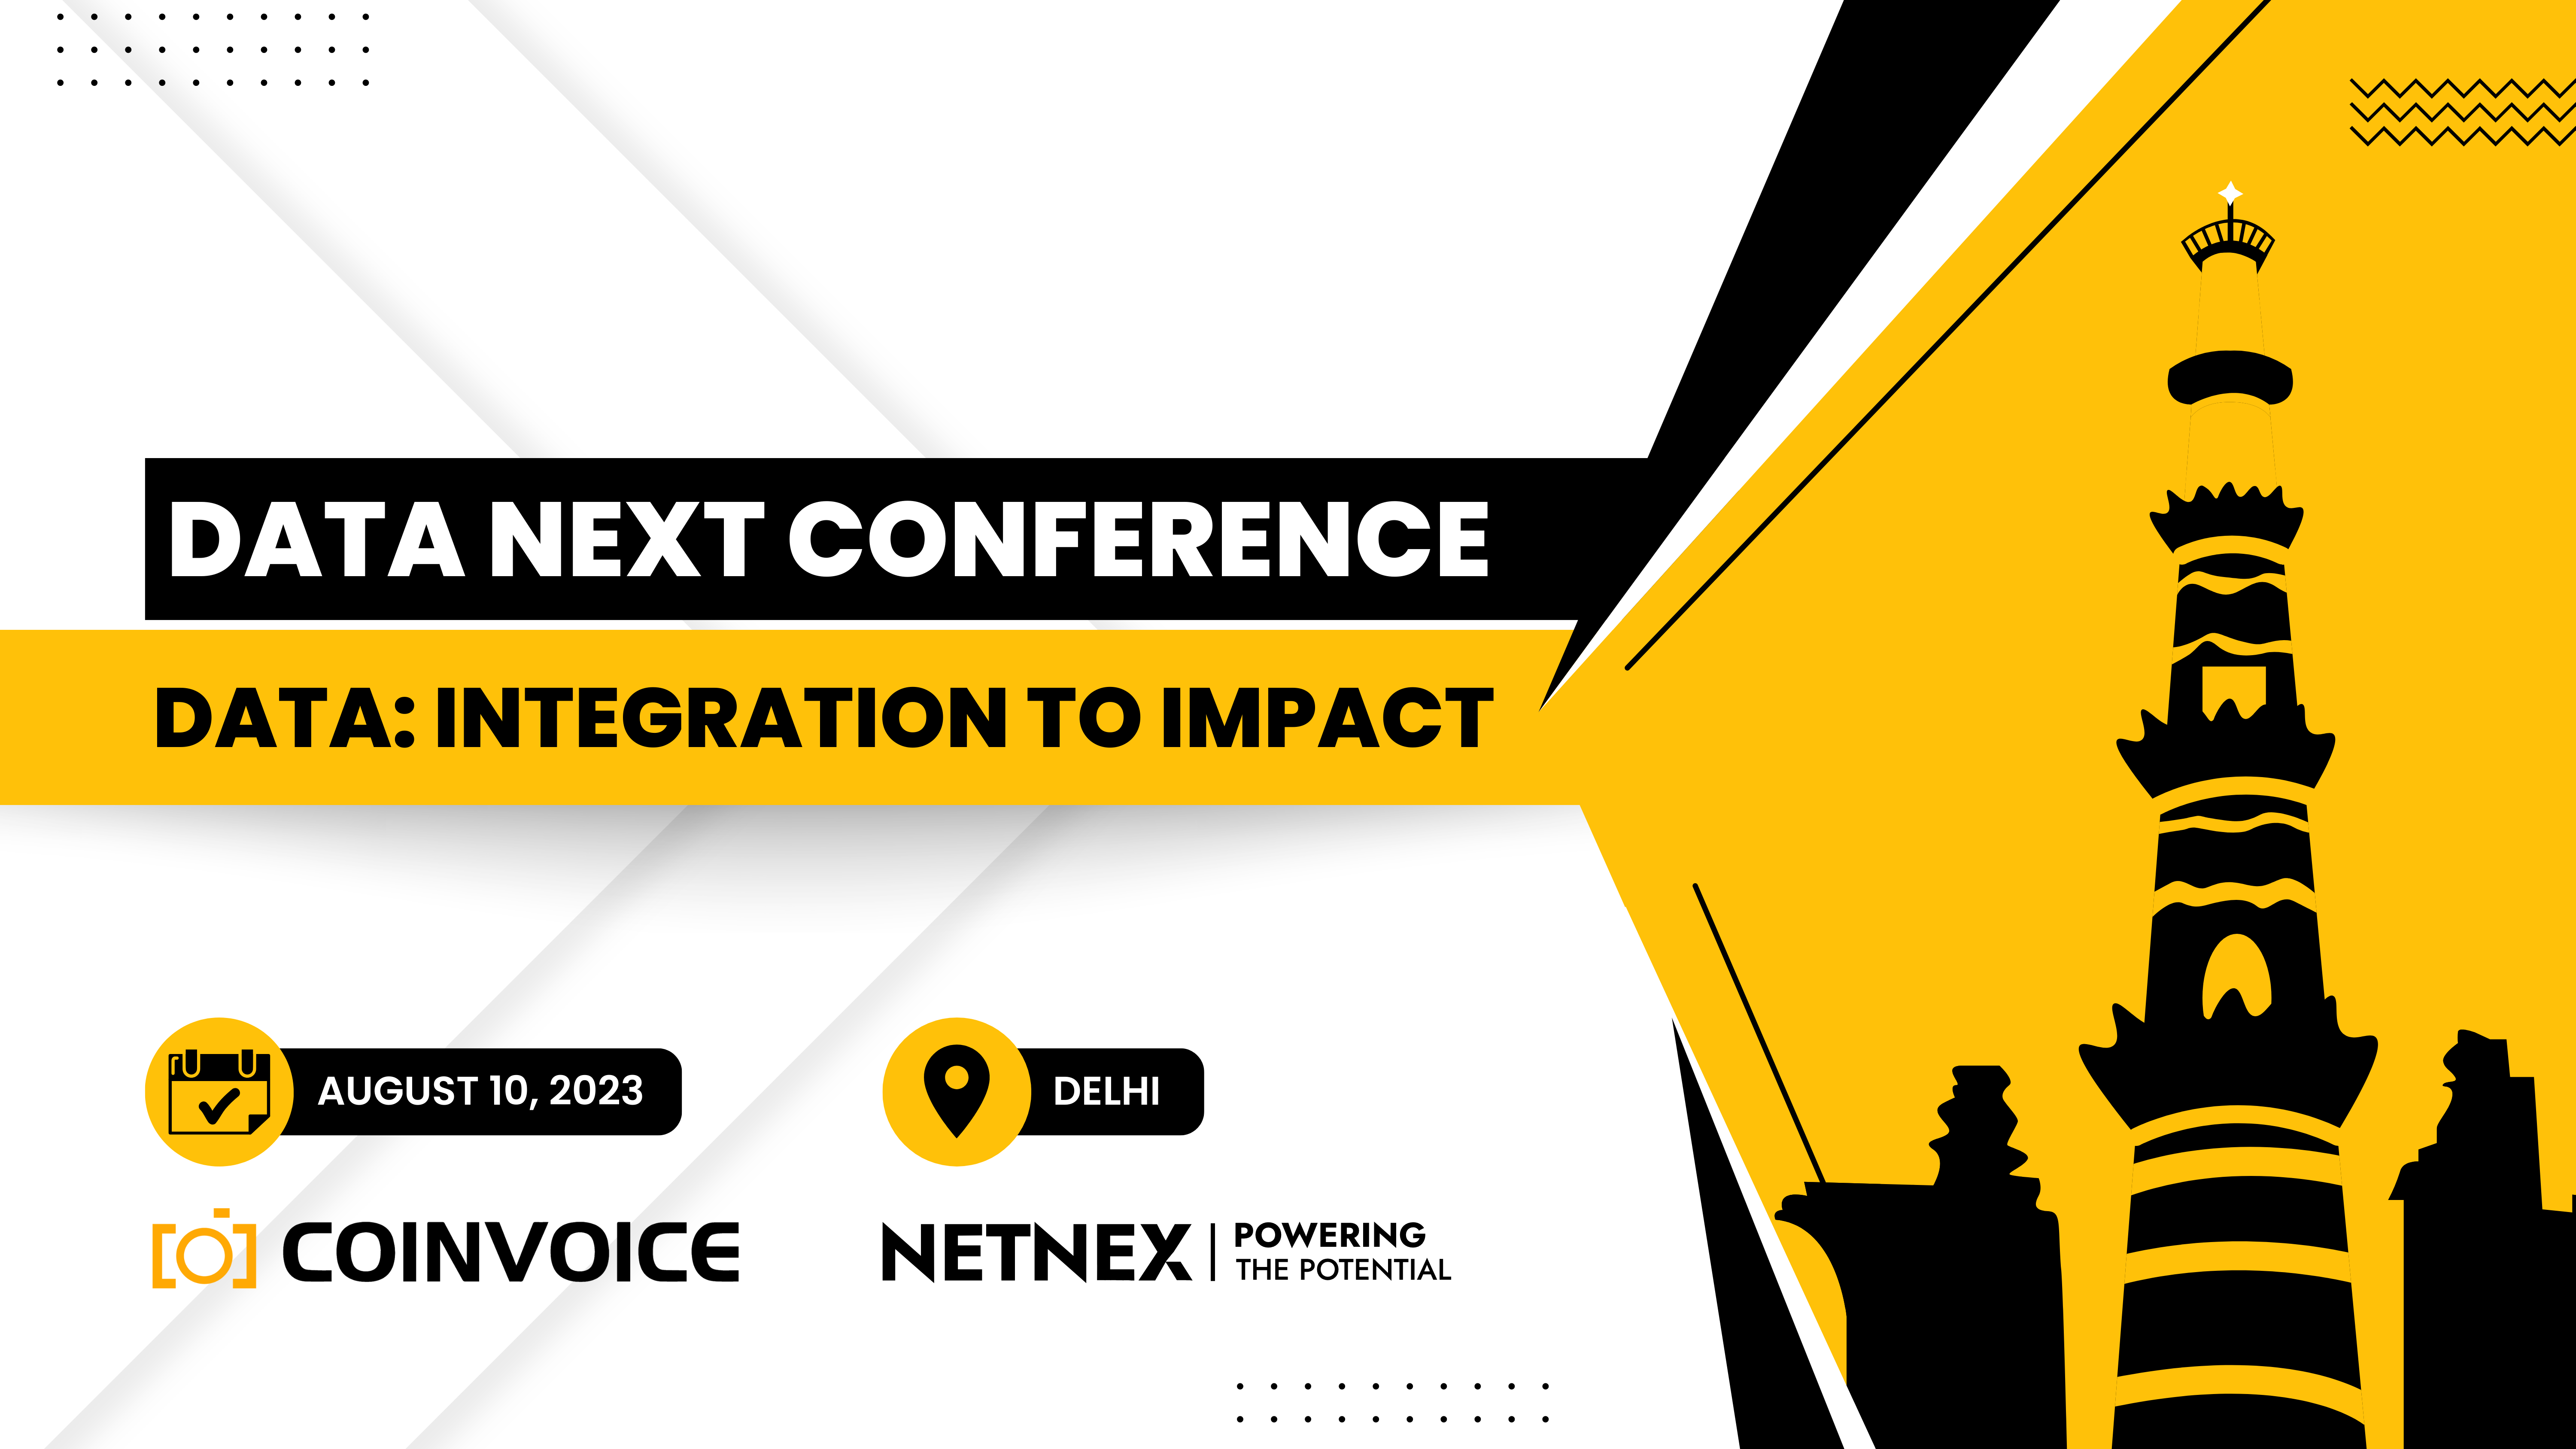 Data Next Conference - Data: Integration to Impact